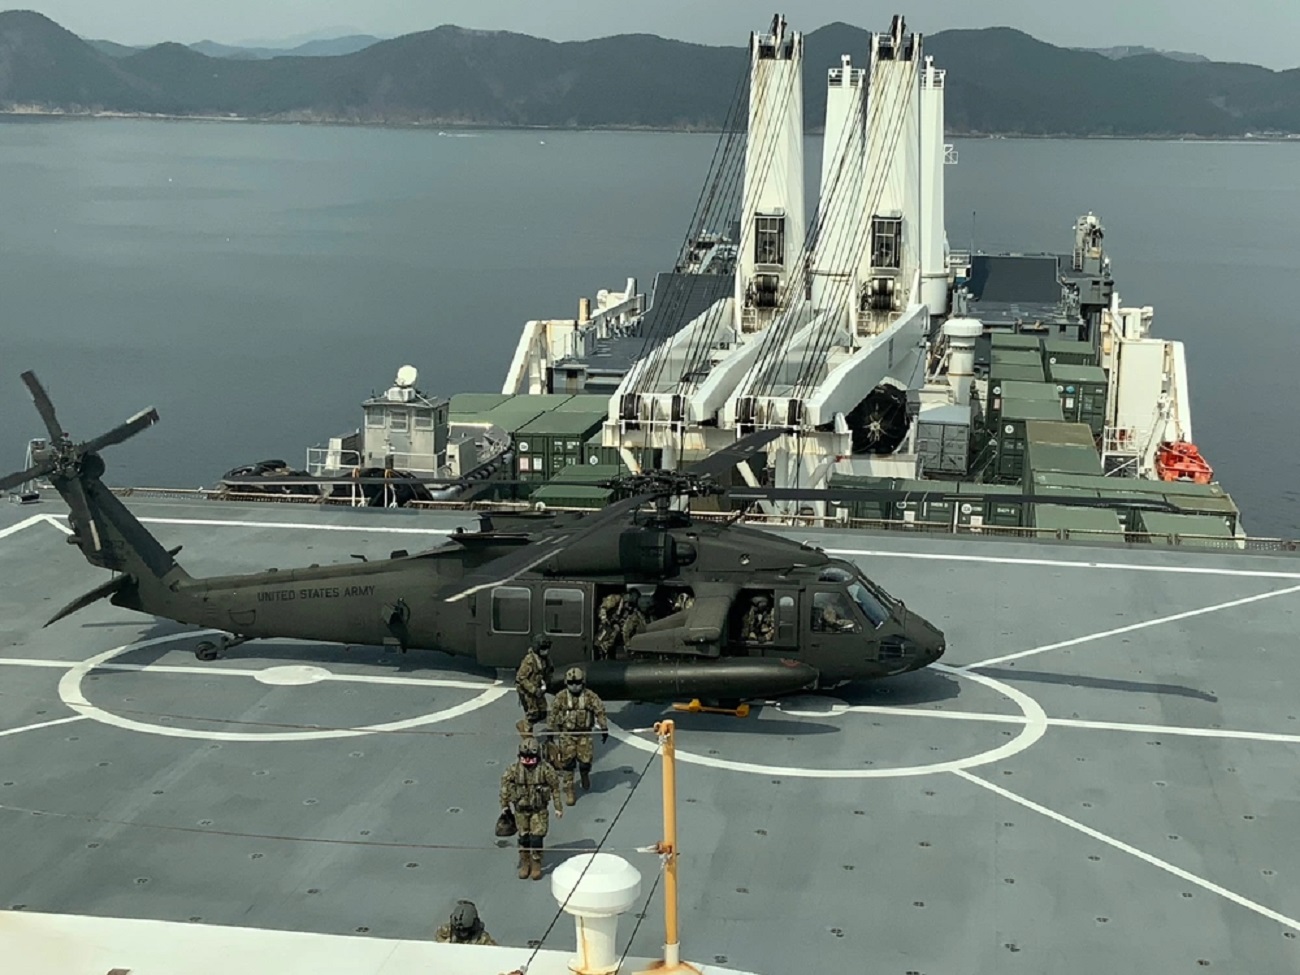 US Army UH-60M Black Hawk Assault Helicopters Conduct Deck Landings on USNS Dahl